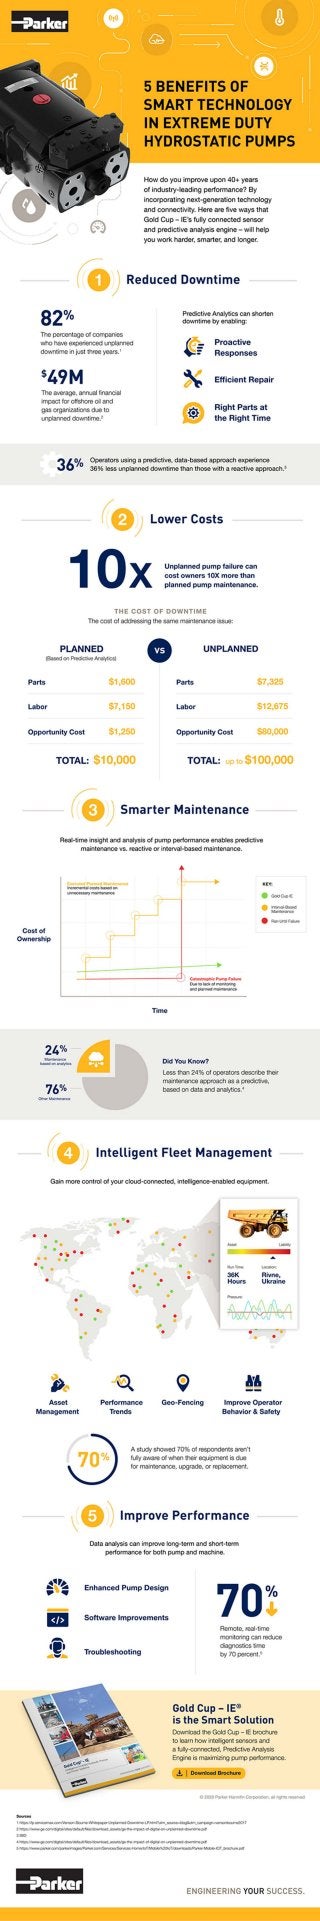 5 Benefits of Smart Technology in Extreme Duty Hydrostatic Pumps infographic